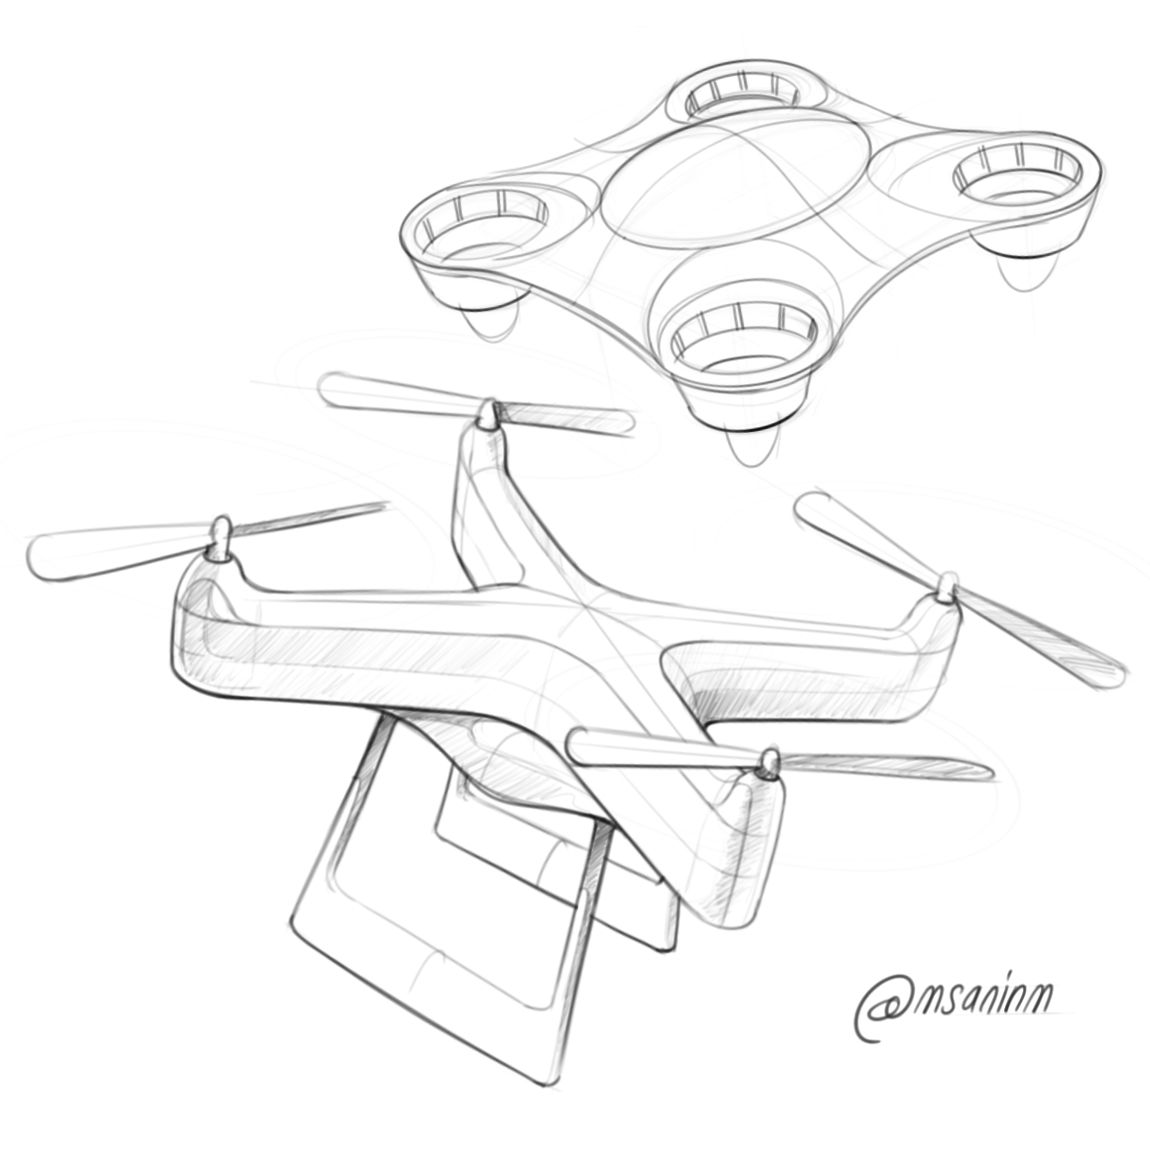 Drone Drawing Realistic Sketch